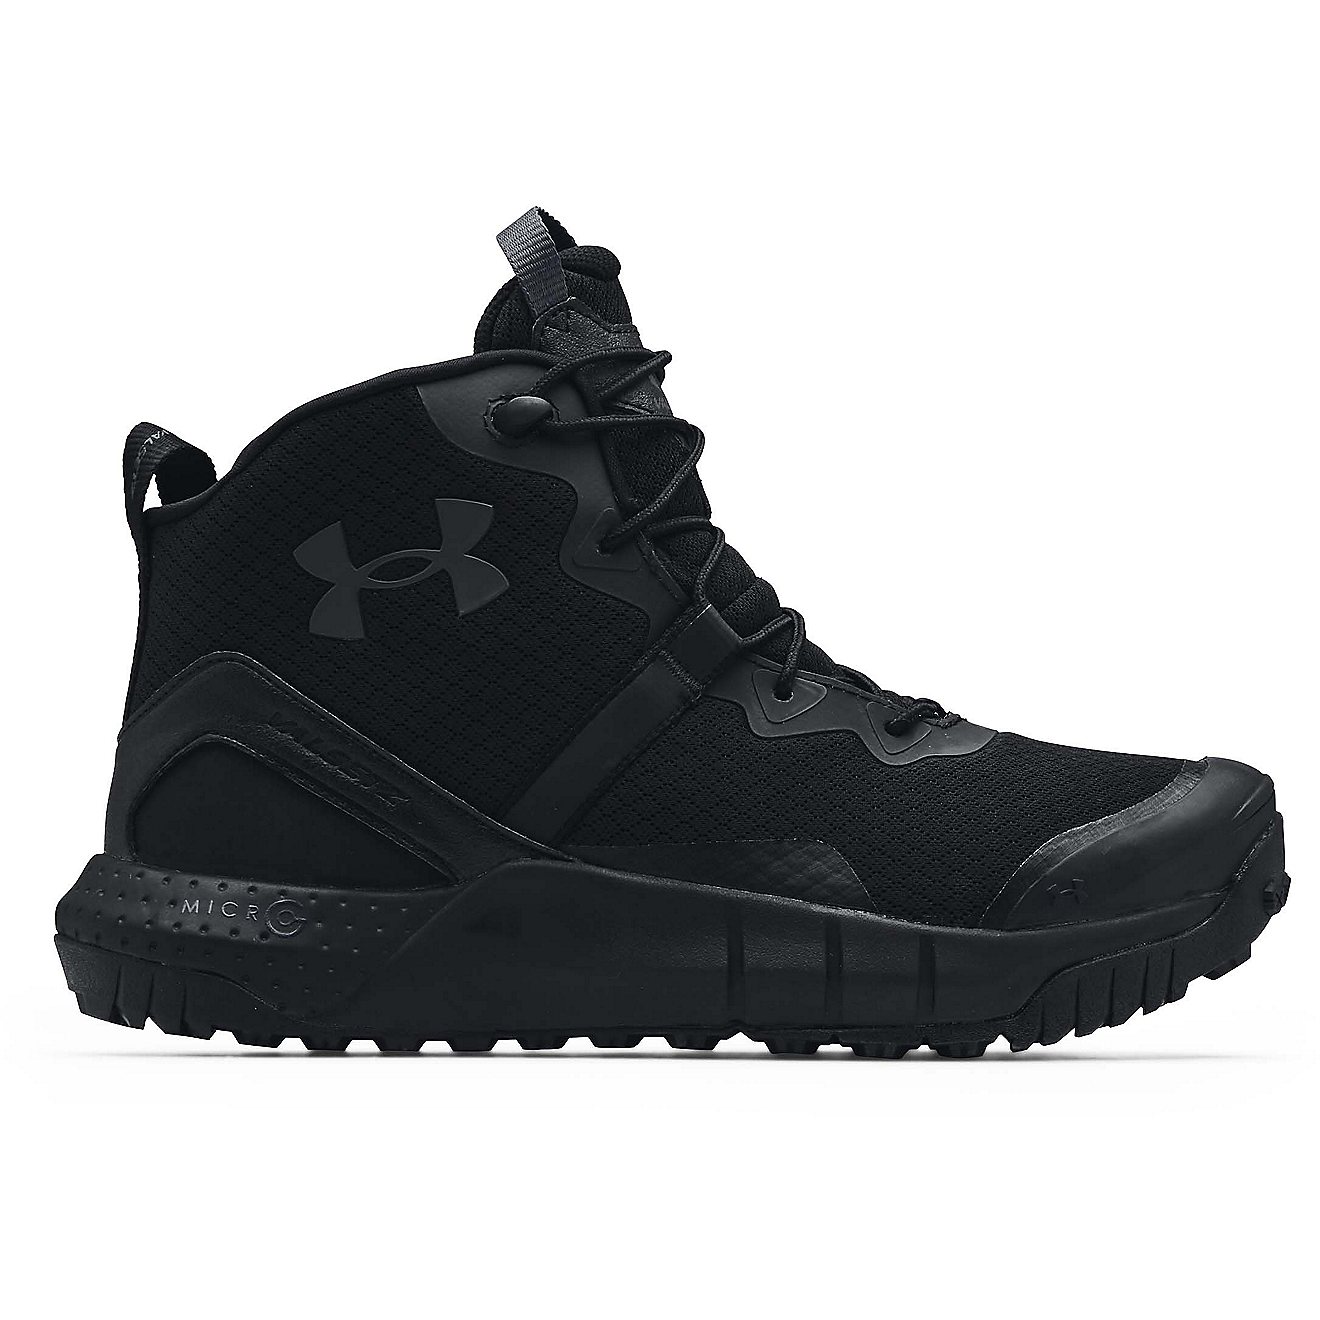 Under Armour Men's Micro G Valsetz Mid Tactical Boots                                                                            - view number 1